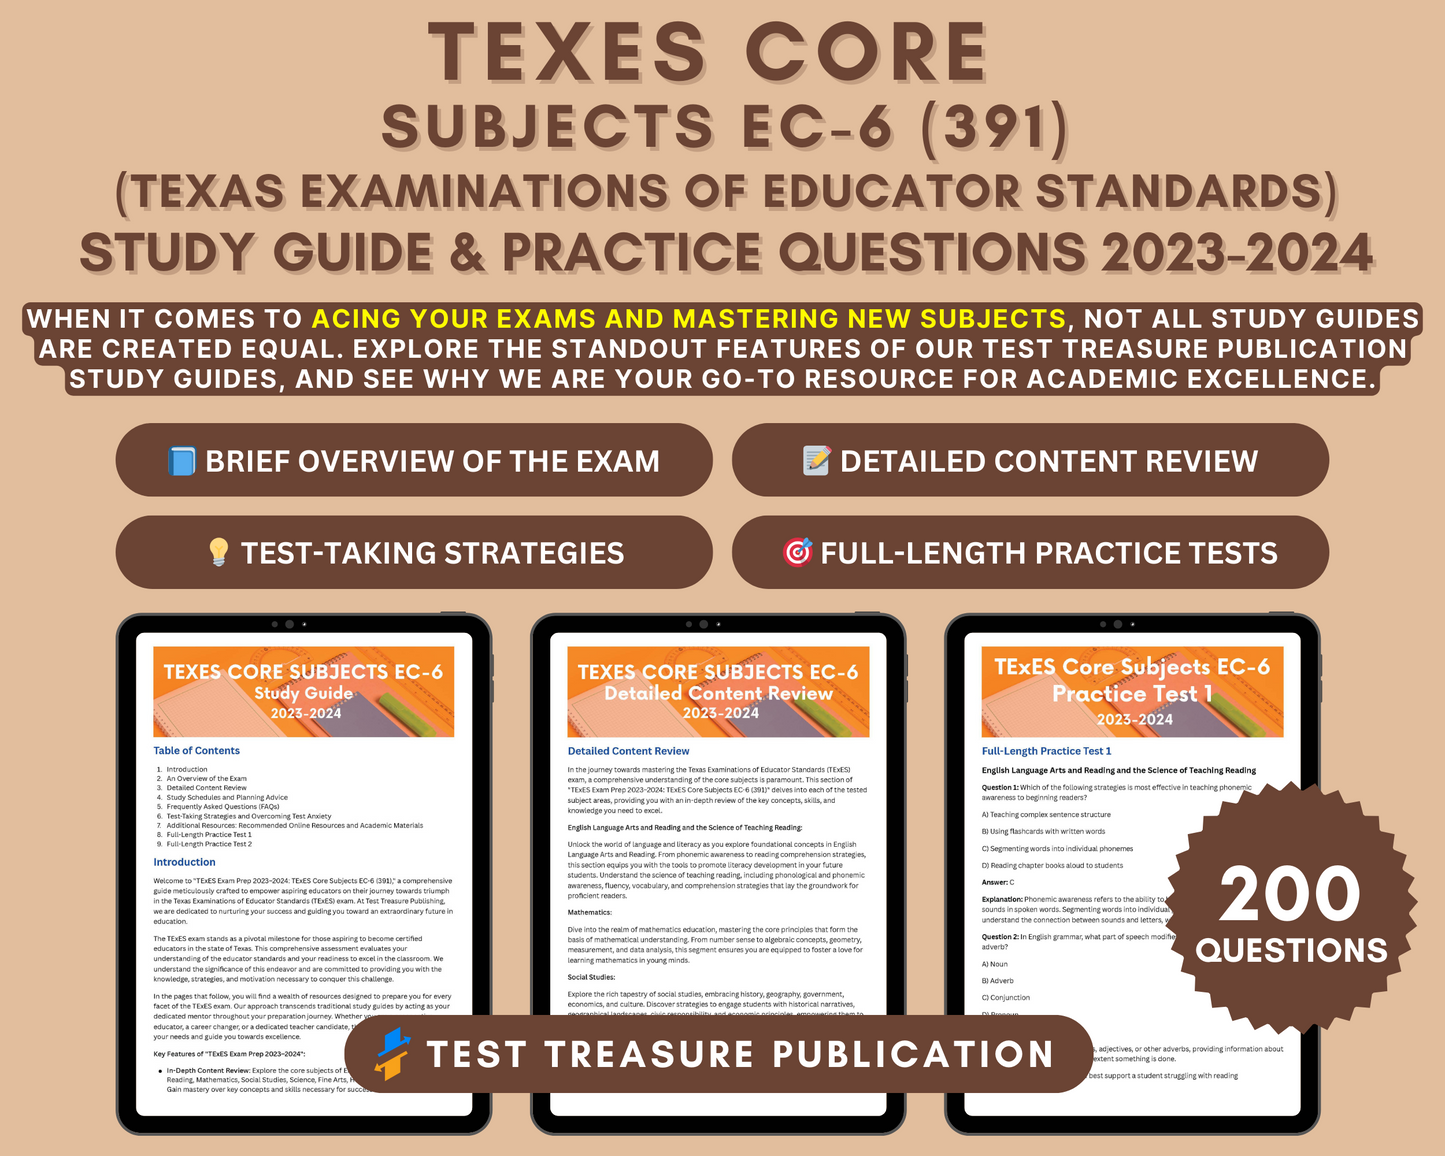 TExES Core Subjects EC-6 (391) Study Guide 2023-2024: Texas Educator Certification Prep with Practice Tests & Exam Tips